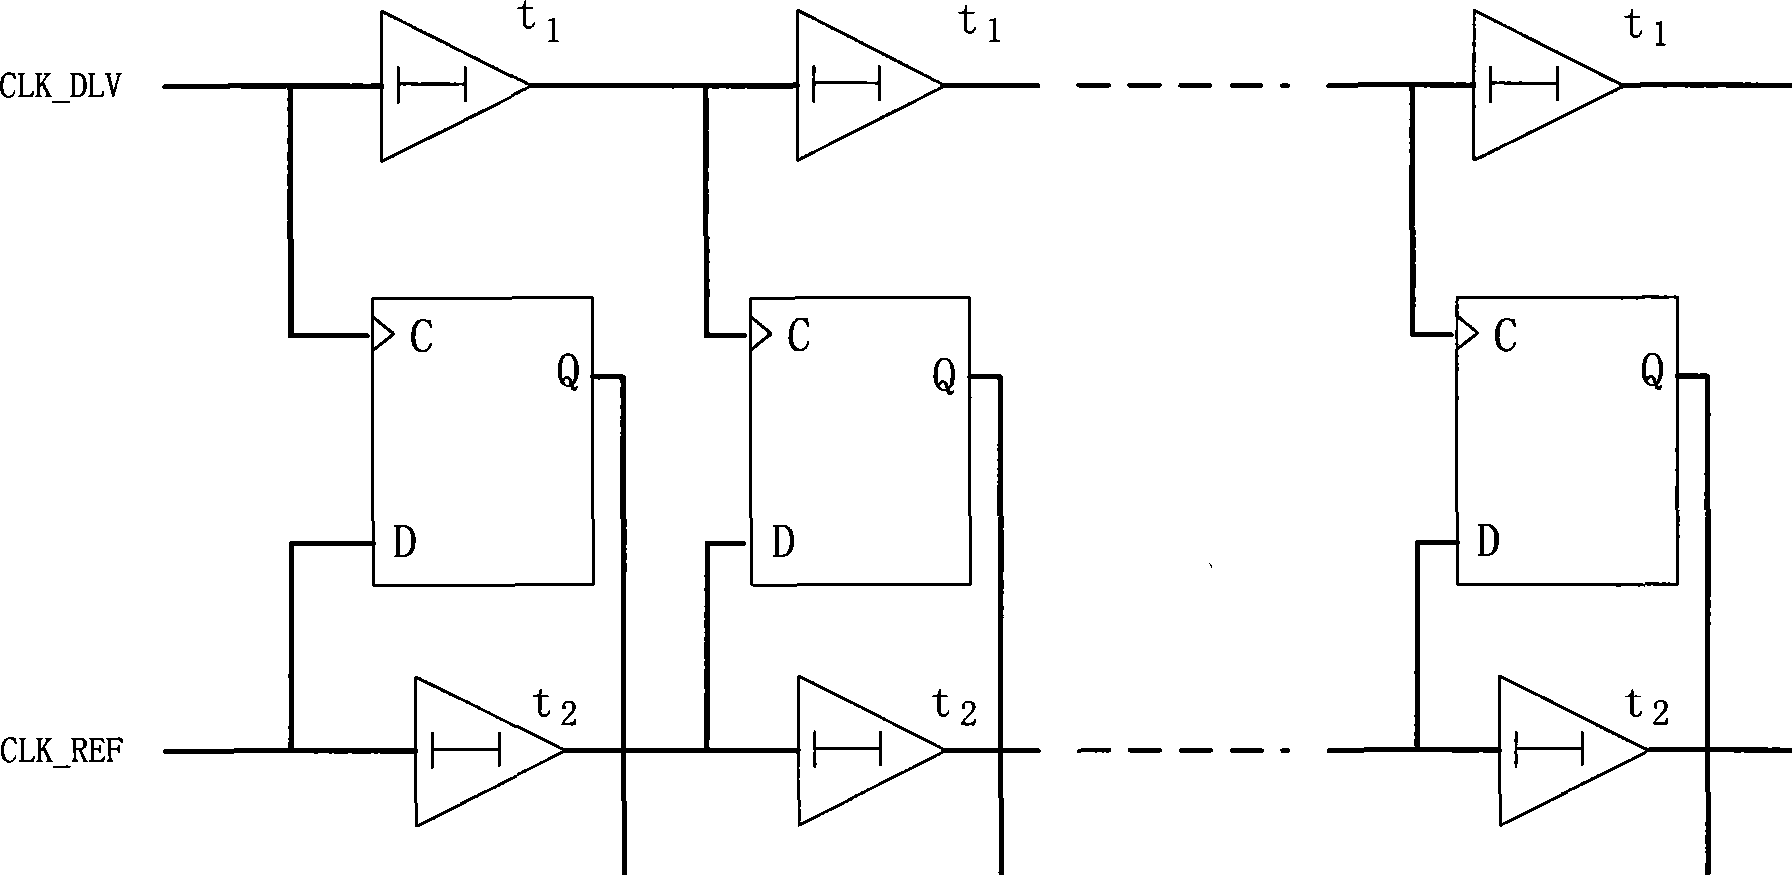 Time-to-digital conversion circuit and method